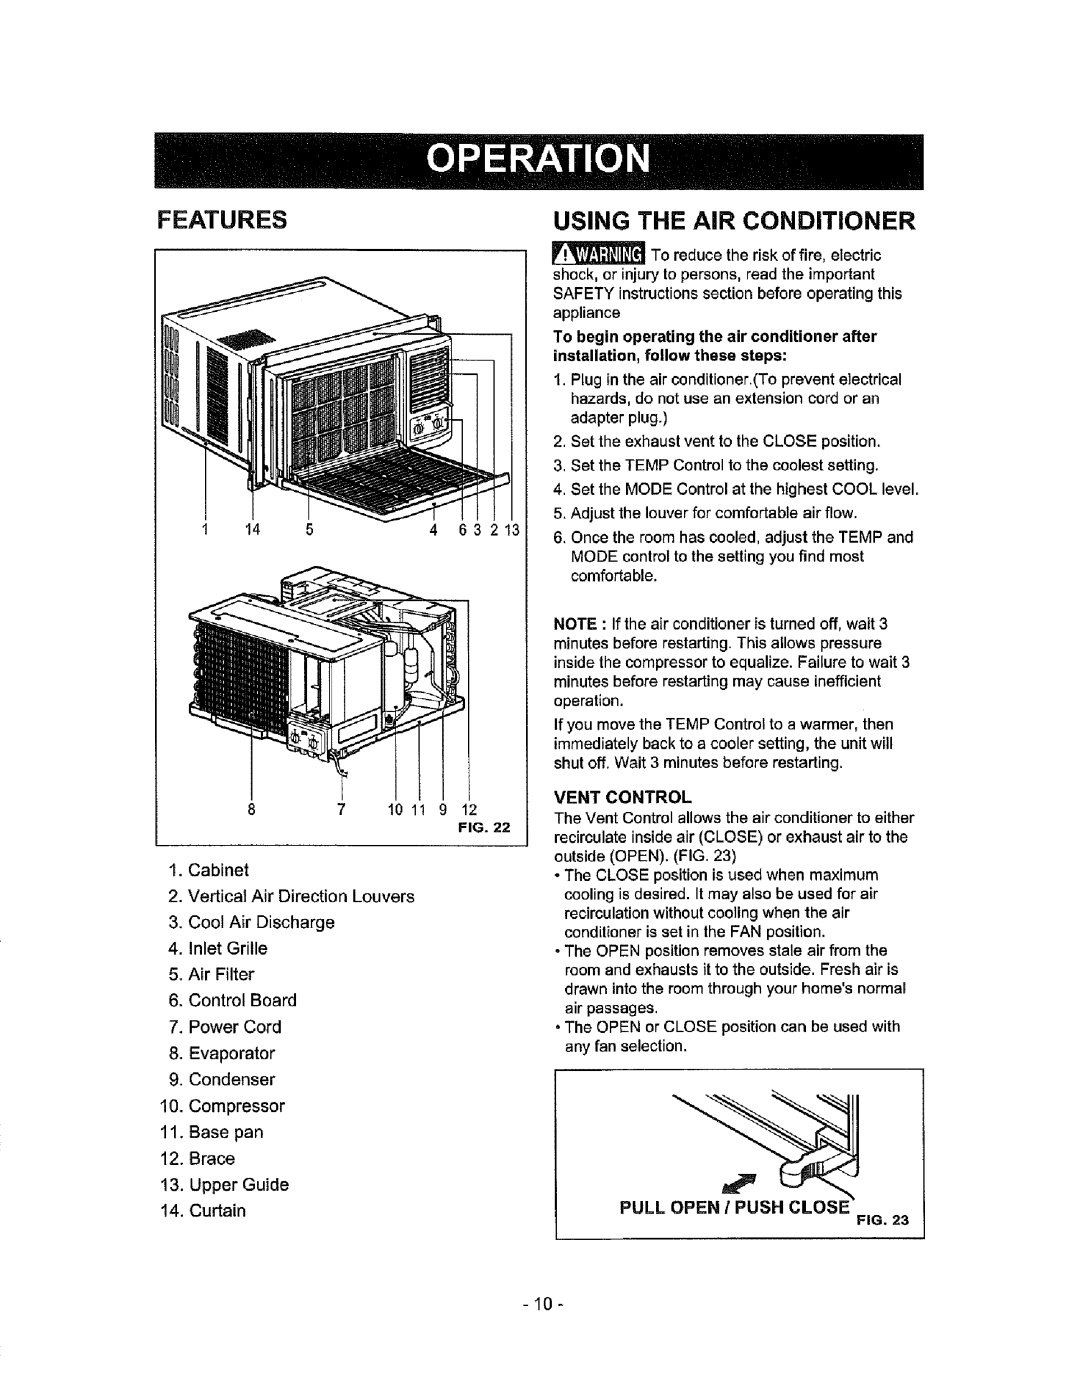 Kenmore 580.72184 owner manual Features, Using, The Air Conditioner 